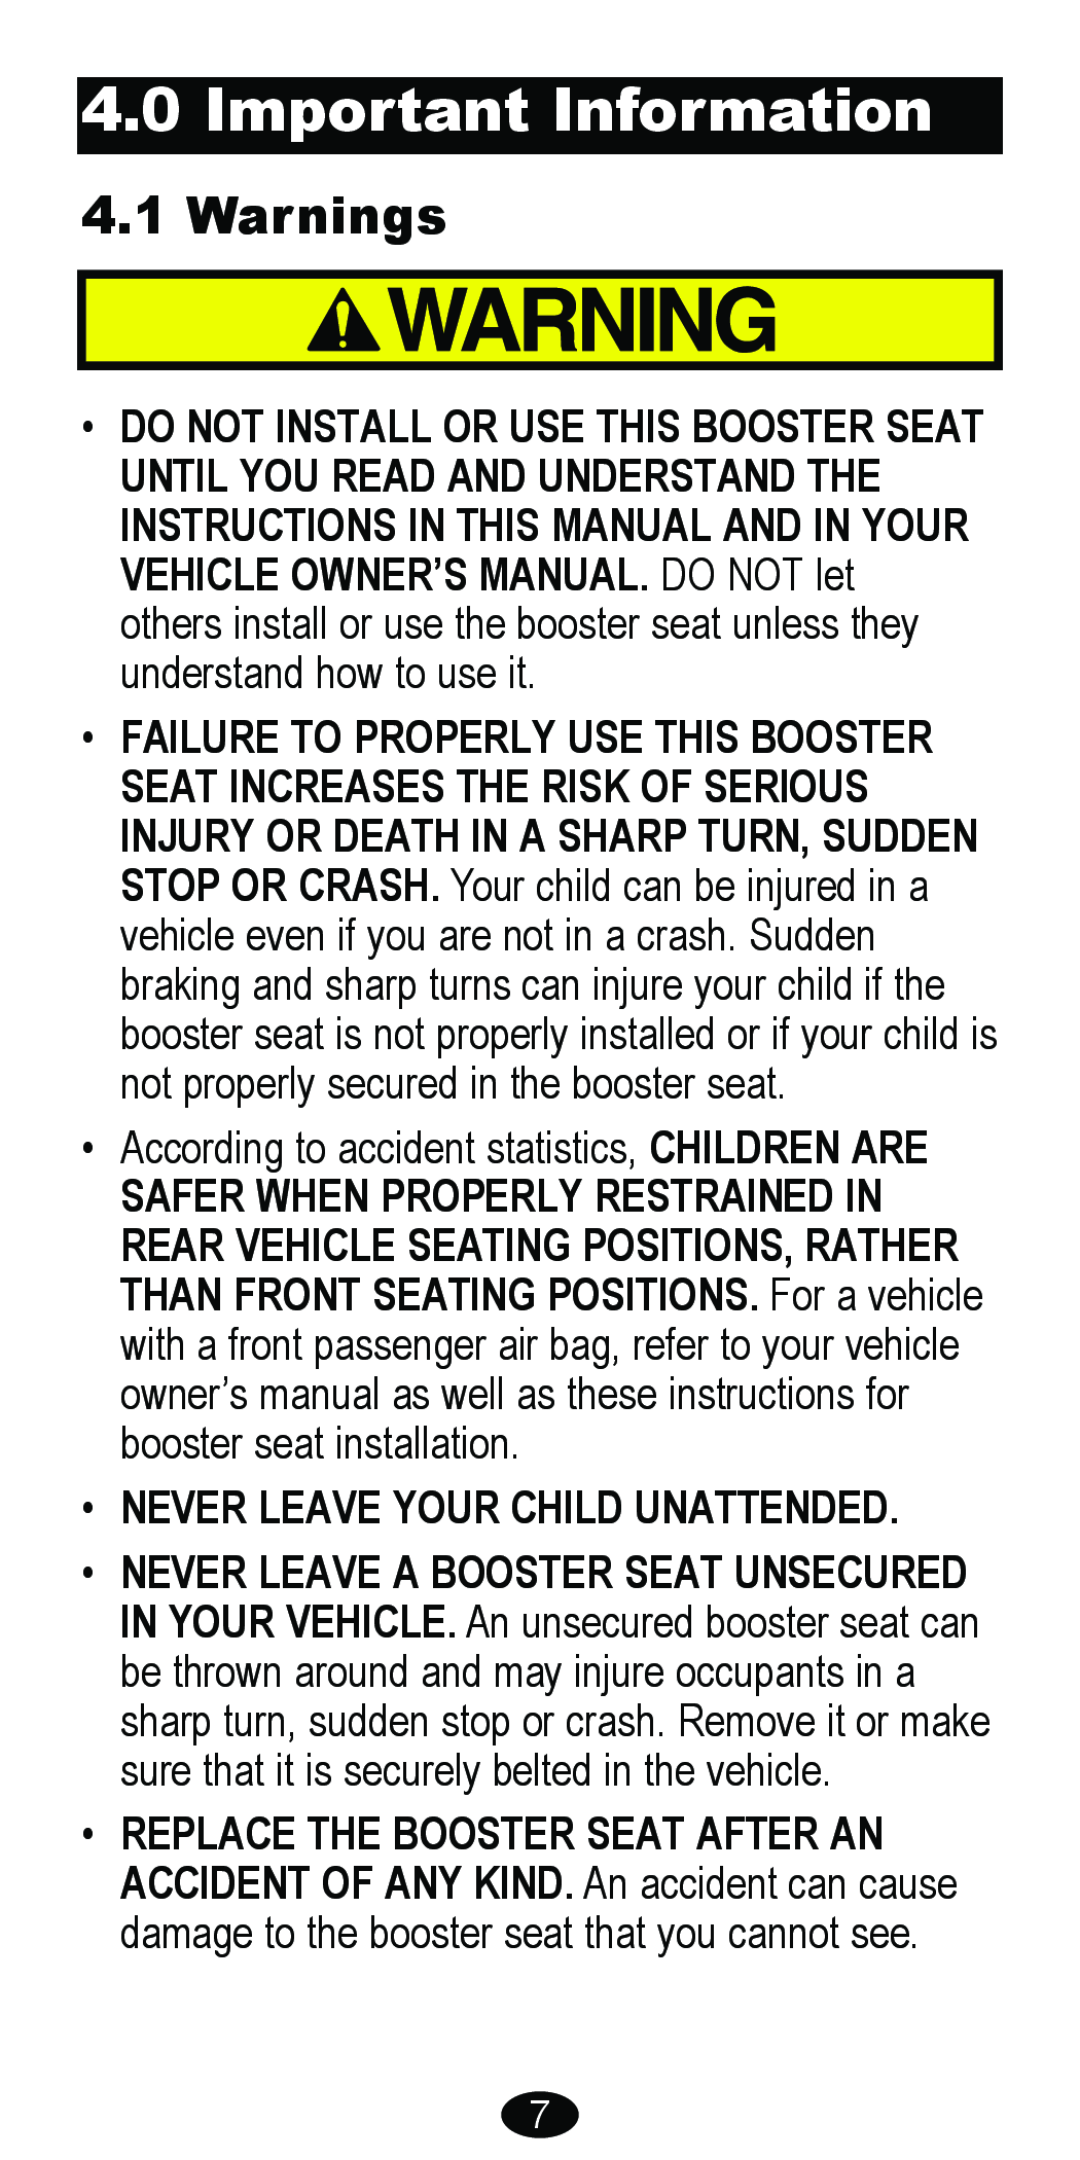 Graco 8481 owner manual Important Information, Warnings 